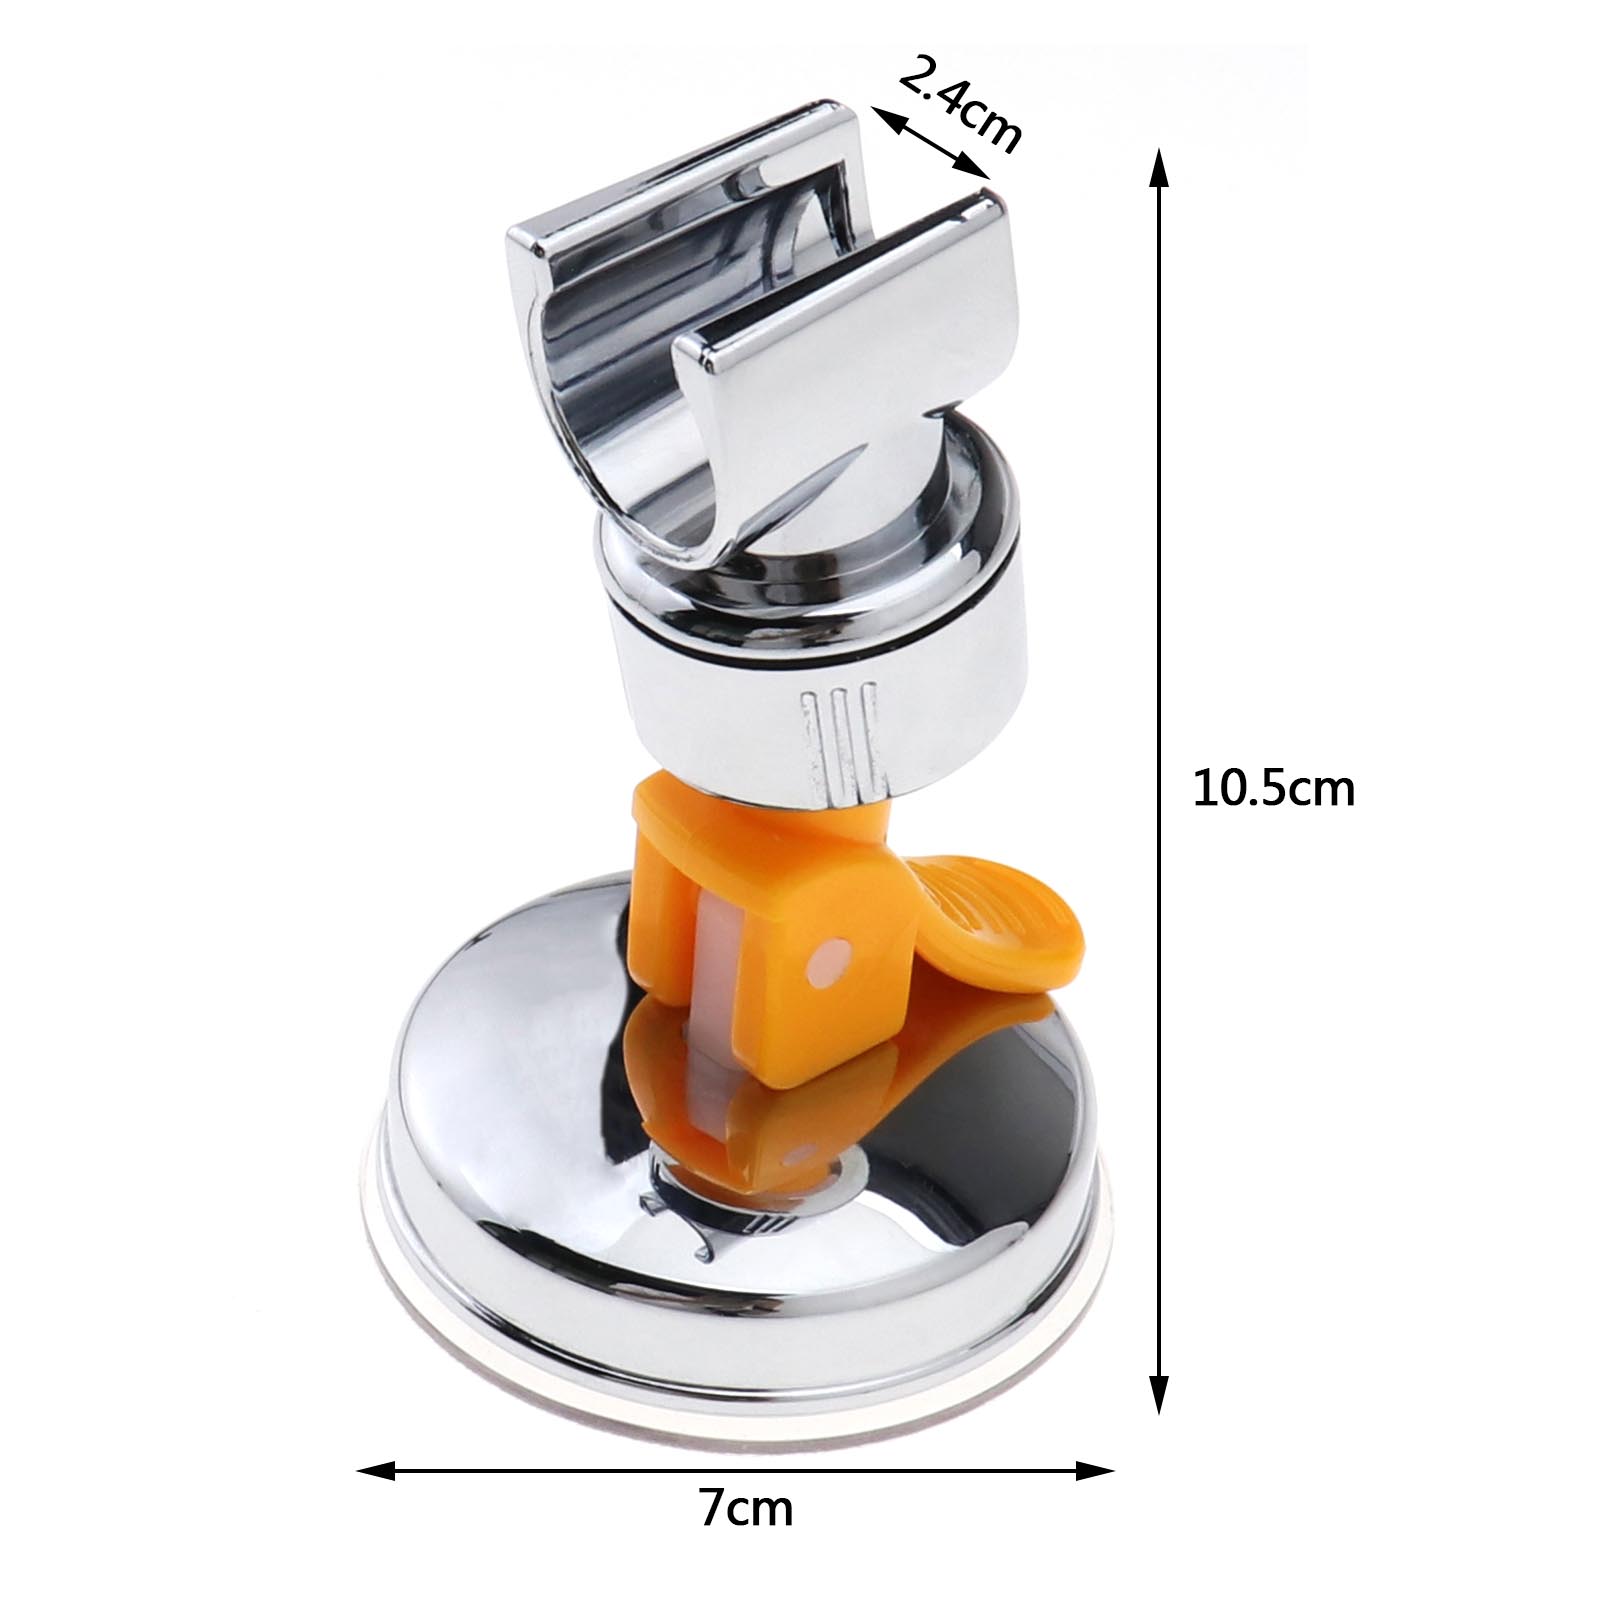 Powerful Handset Suction Cup Shower Bracket Base